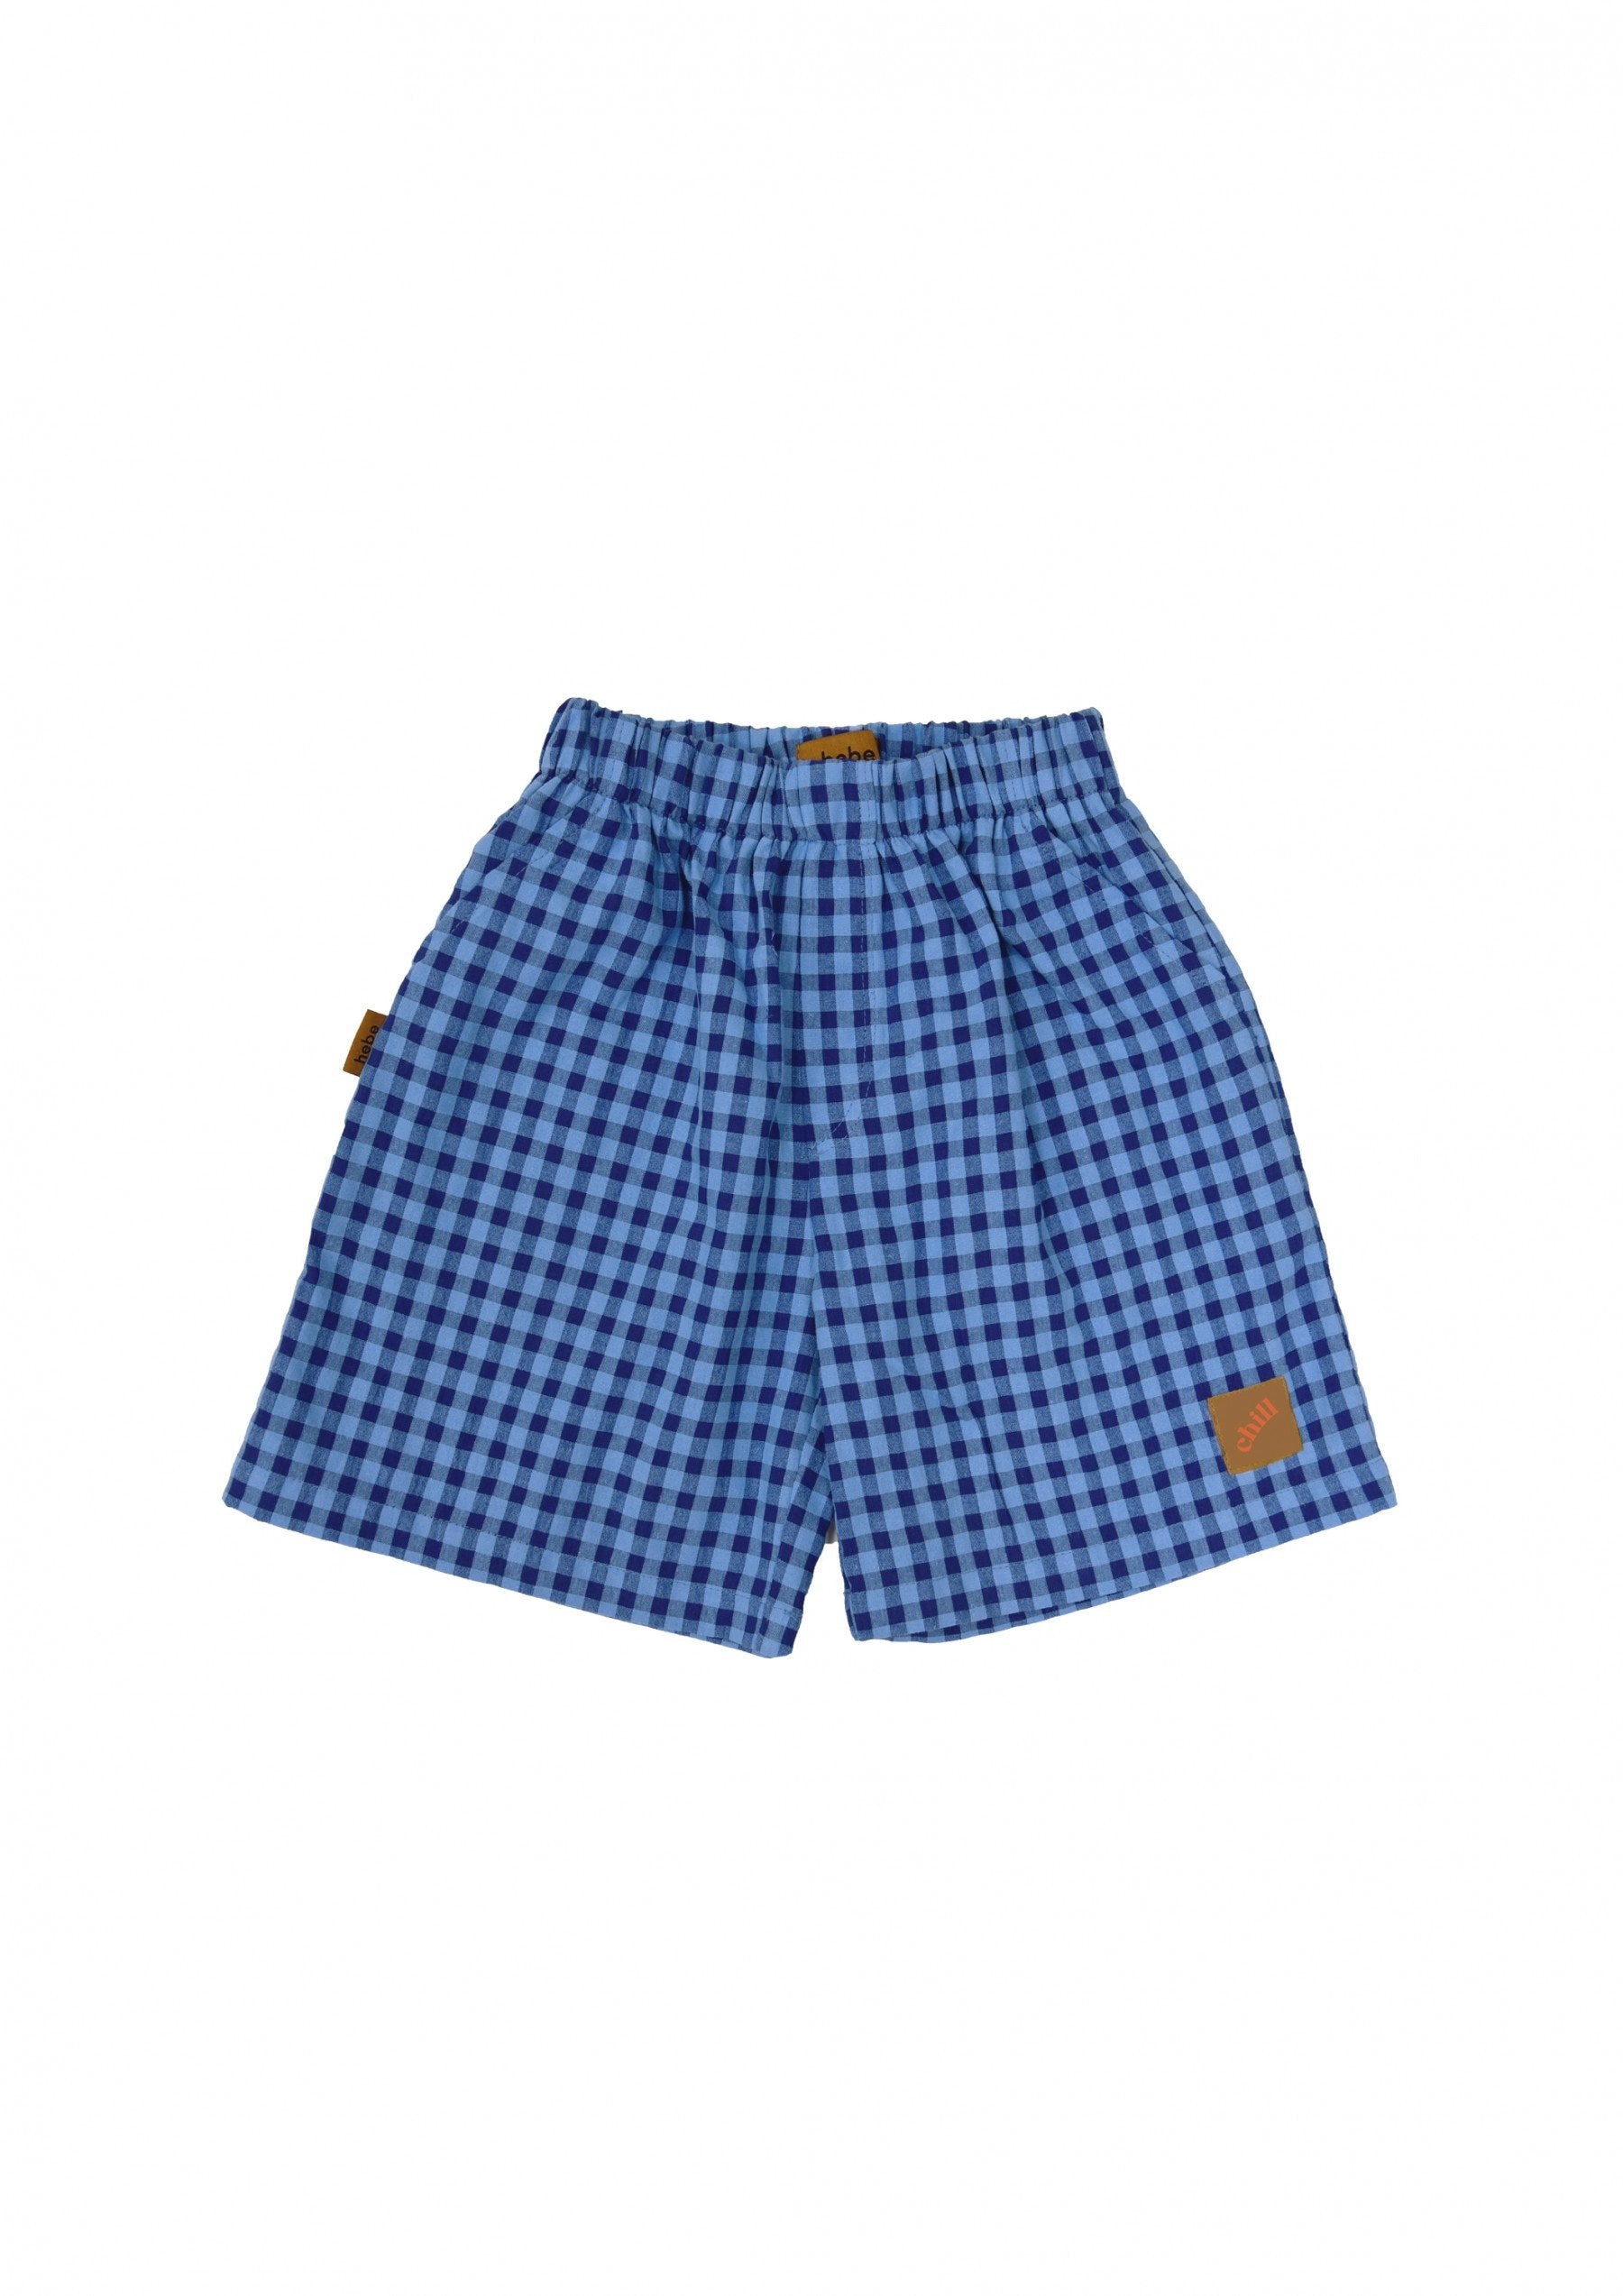 Hebe Shorts - Cotton with Blue Check